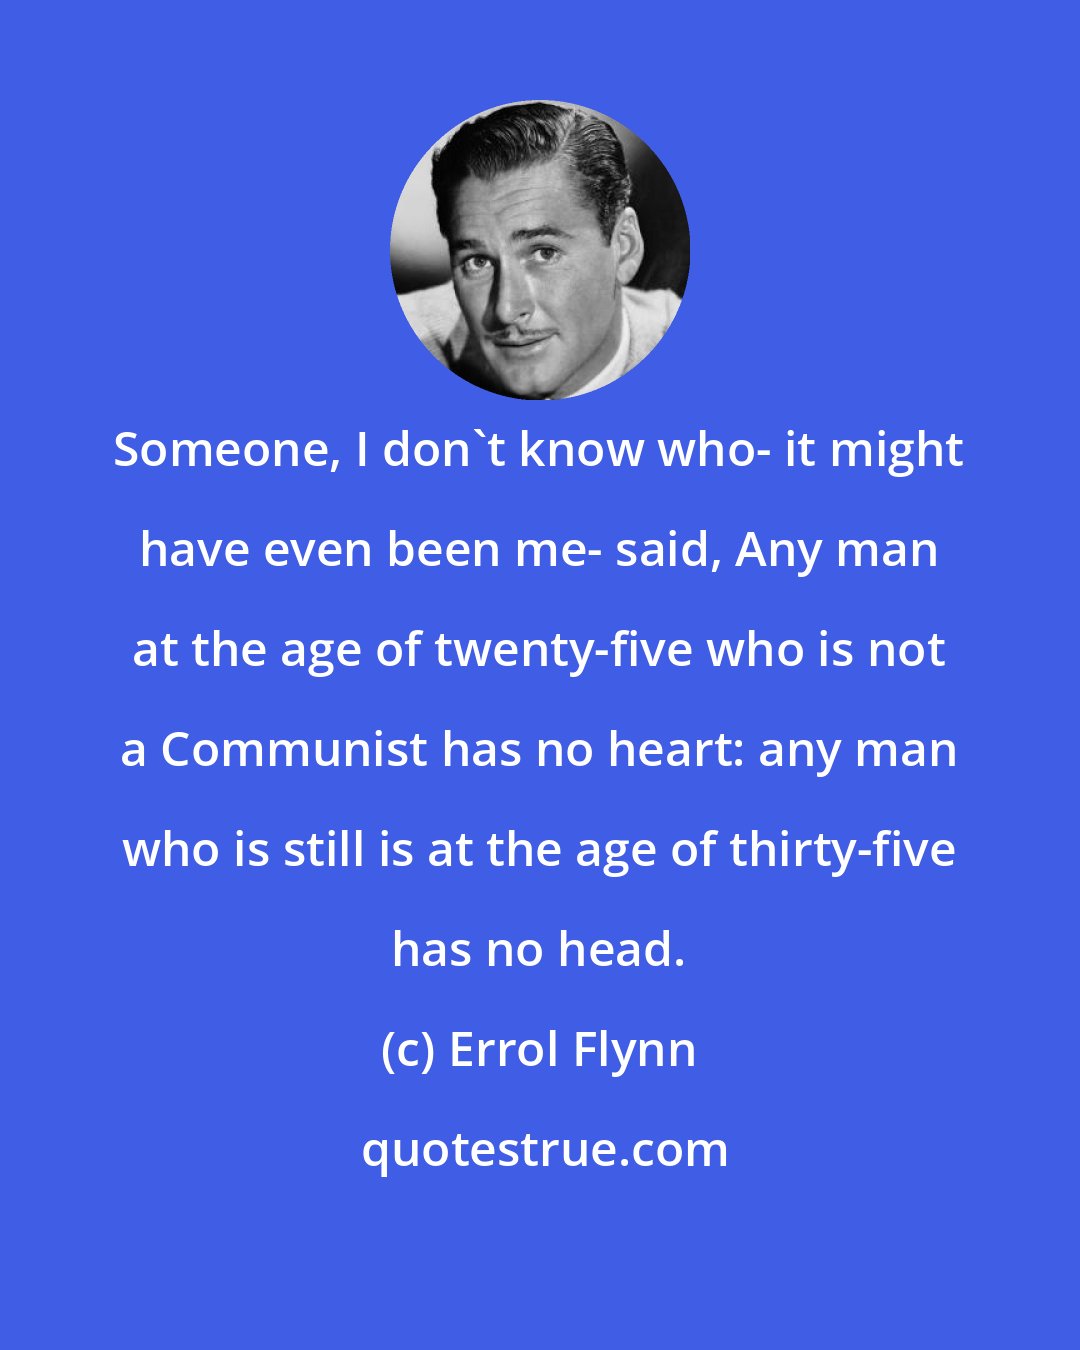 Errol Flynn: Someone, I don't know who- it might have even been me- said, Any man at the age of twenty-five who is not a Communist has no heart: any man who is still is at the age of thirty-five has no head.